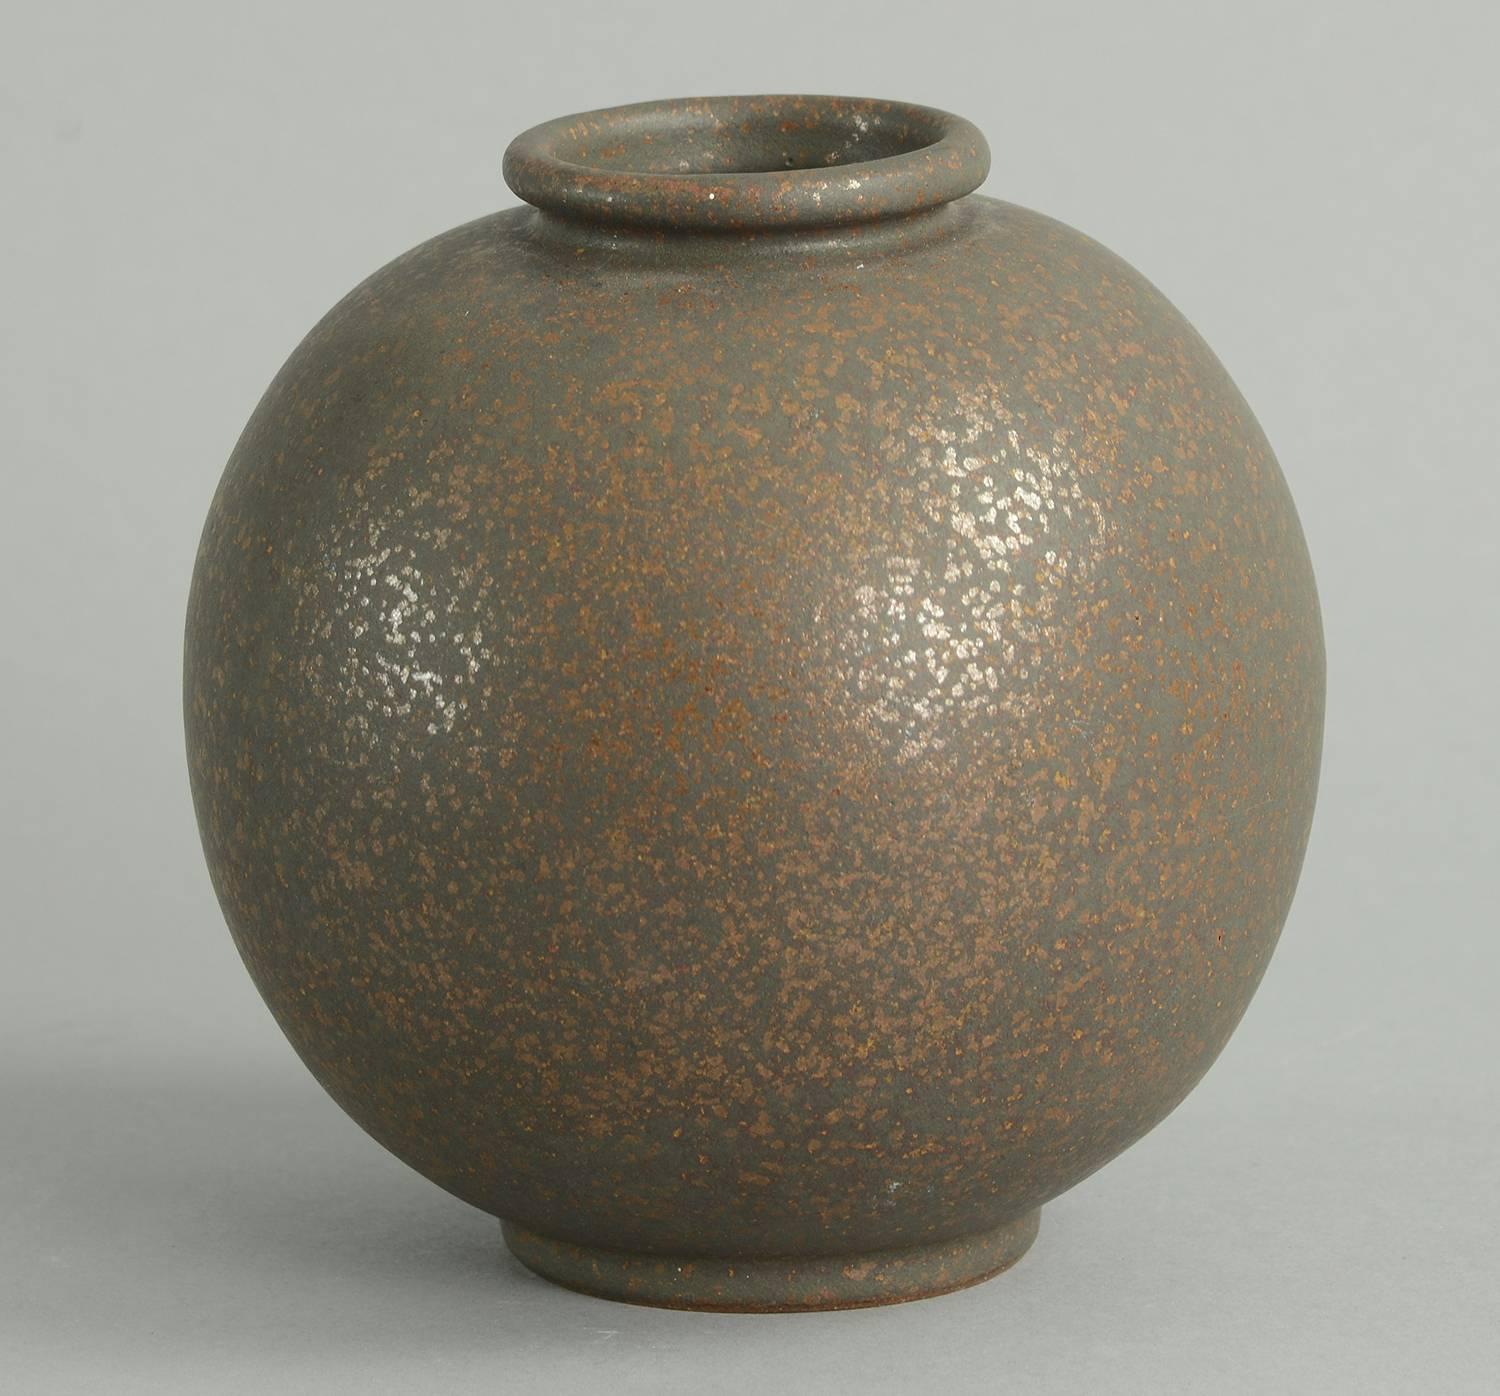 Danish Spherical Vase with Unusual Two-Tone Glaze by Arne Bang, 1930s For Sale